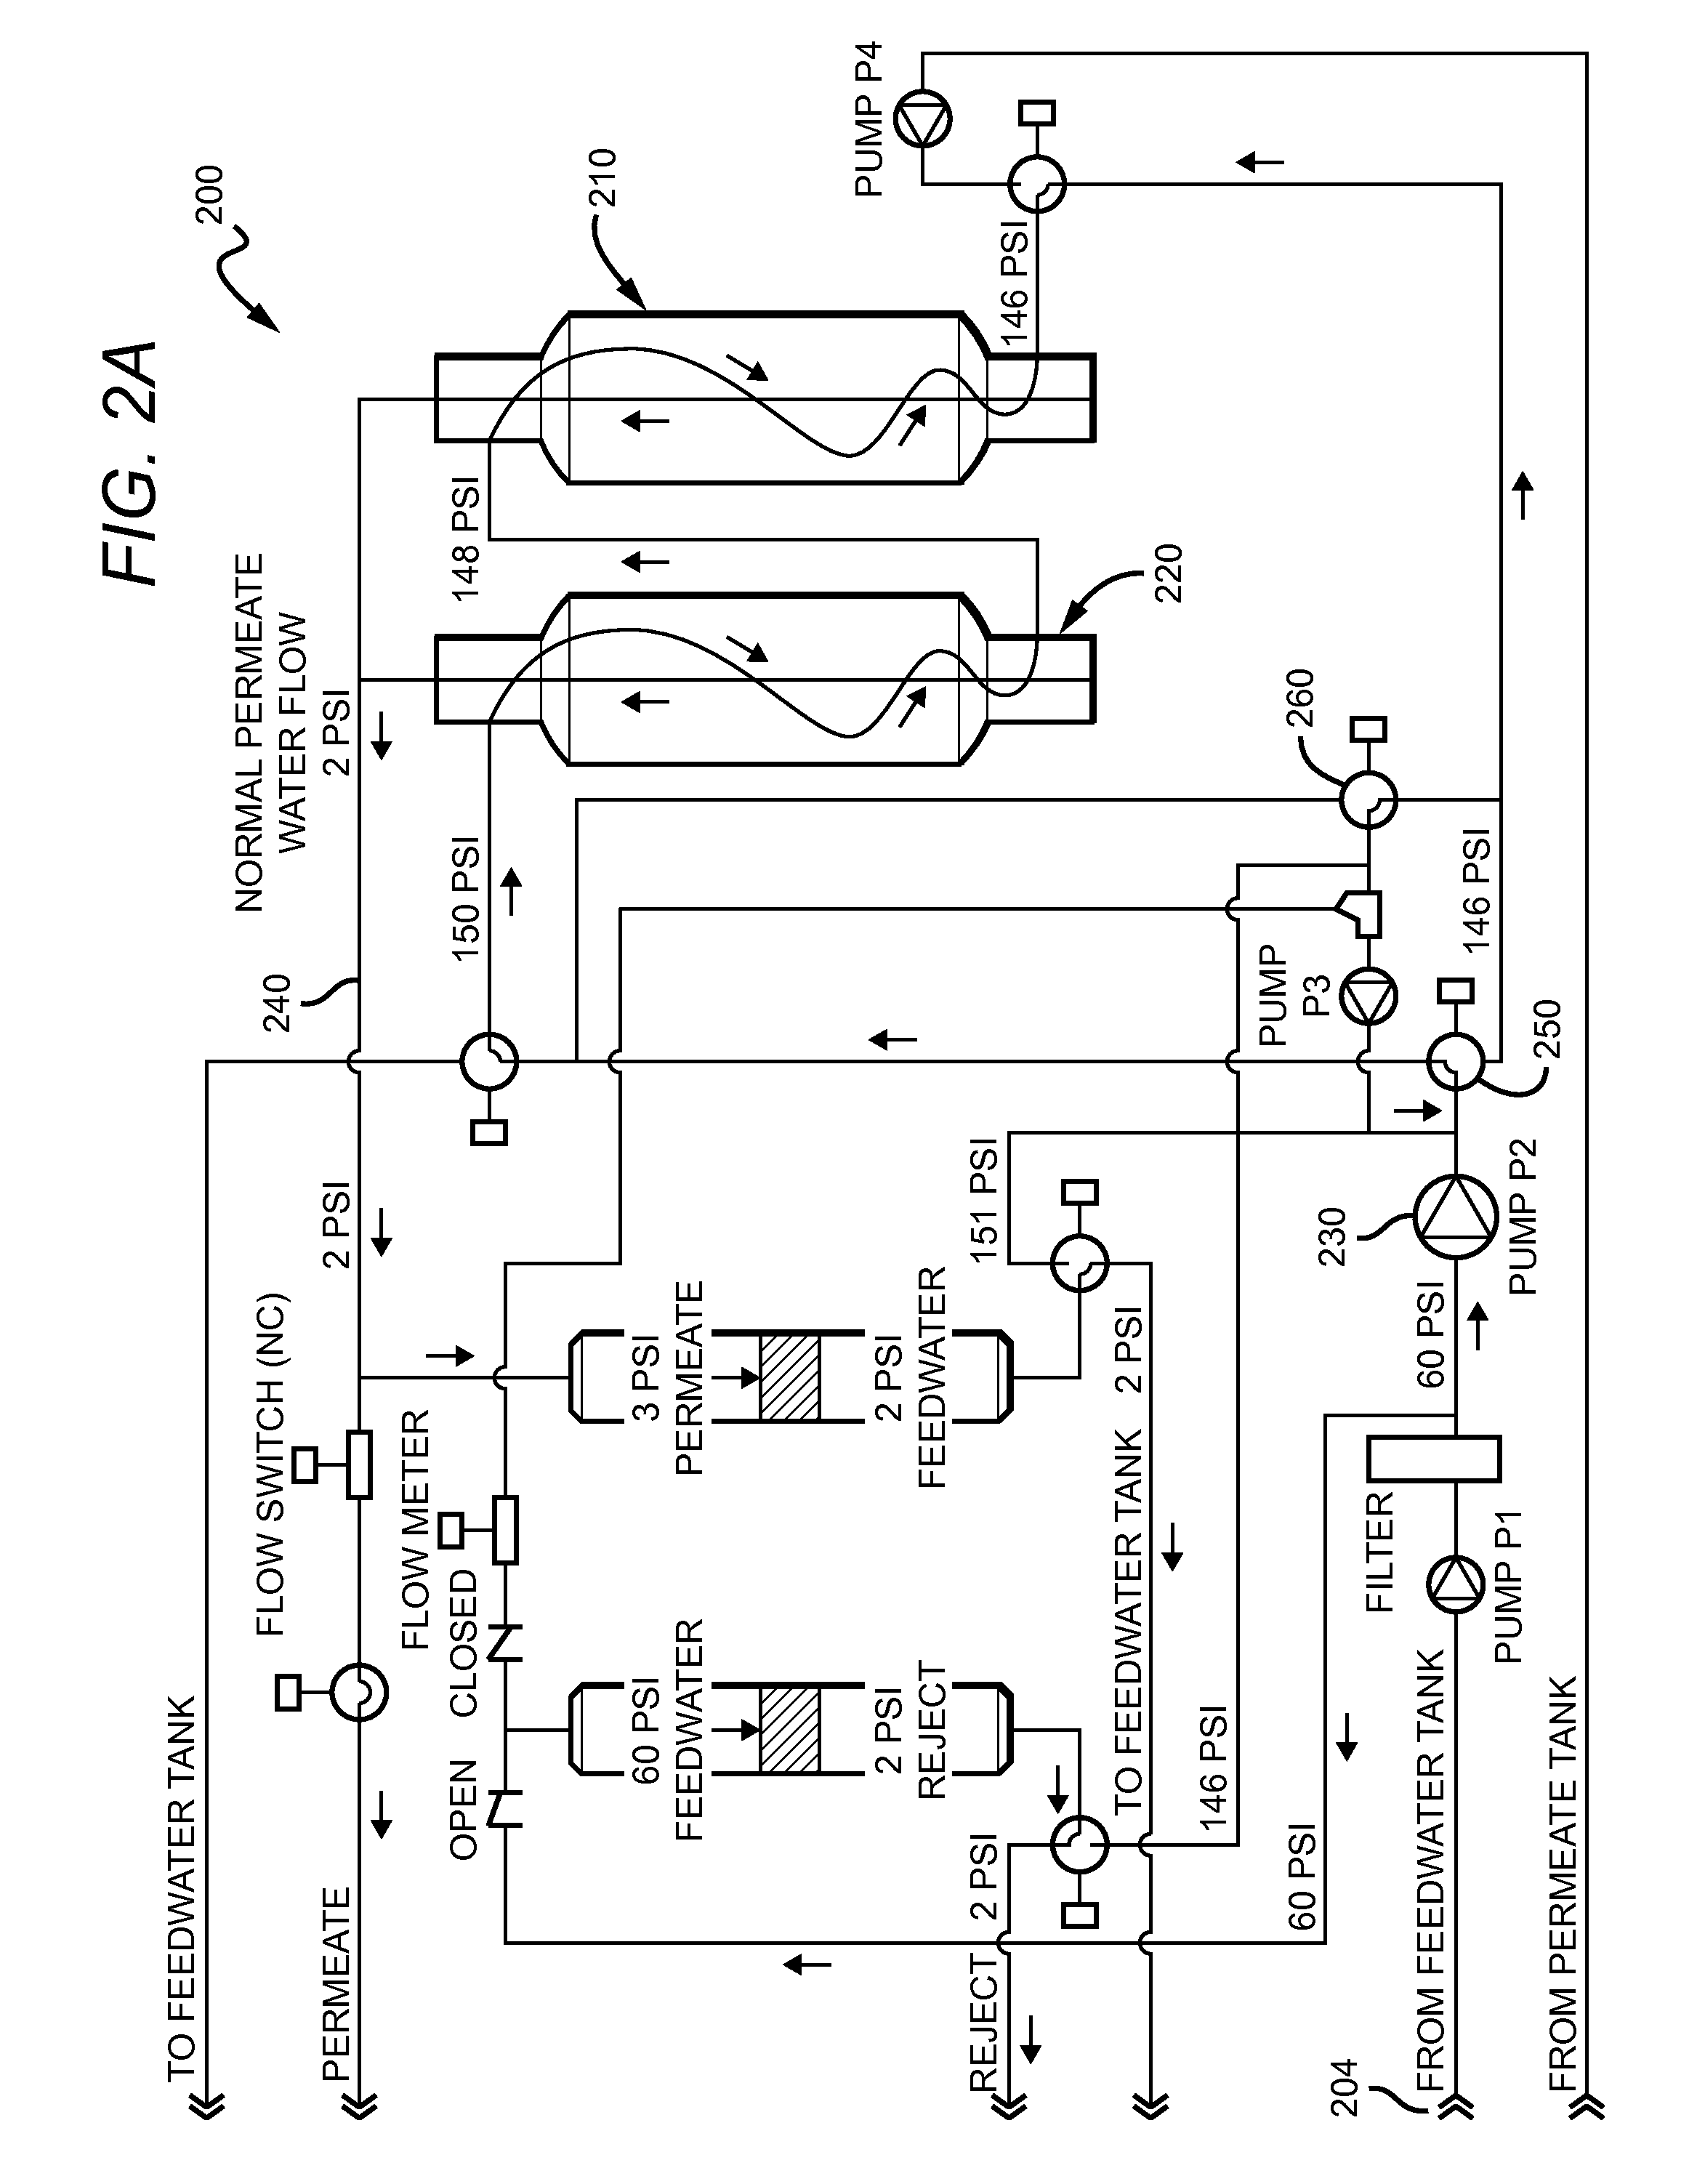 Systems and Methods for Reducing Fouling in a Filtration System